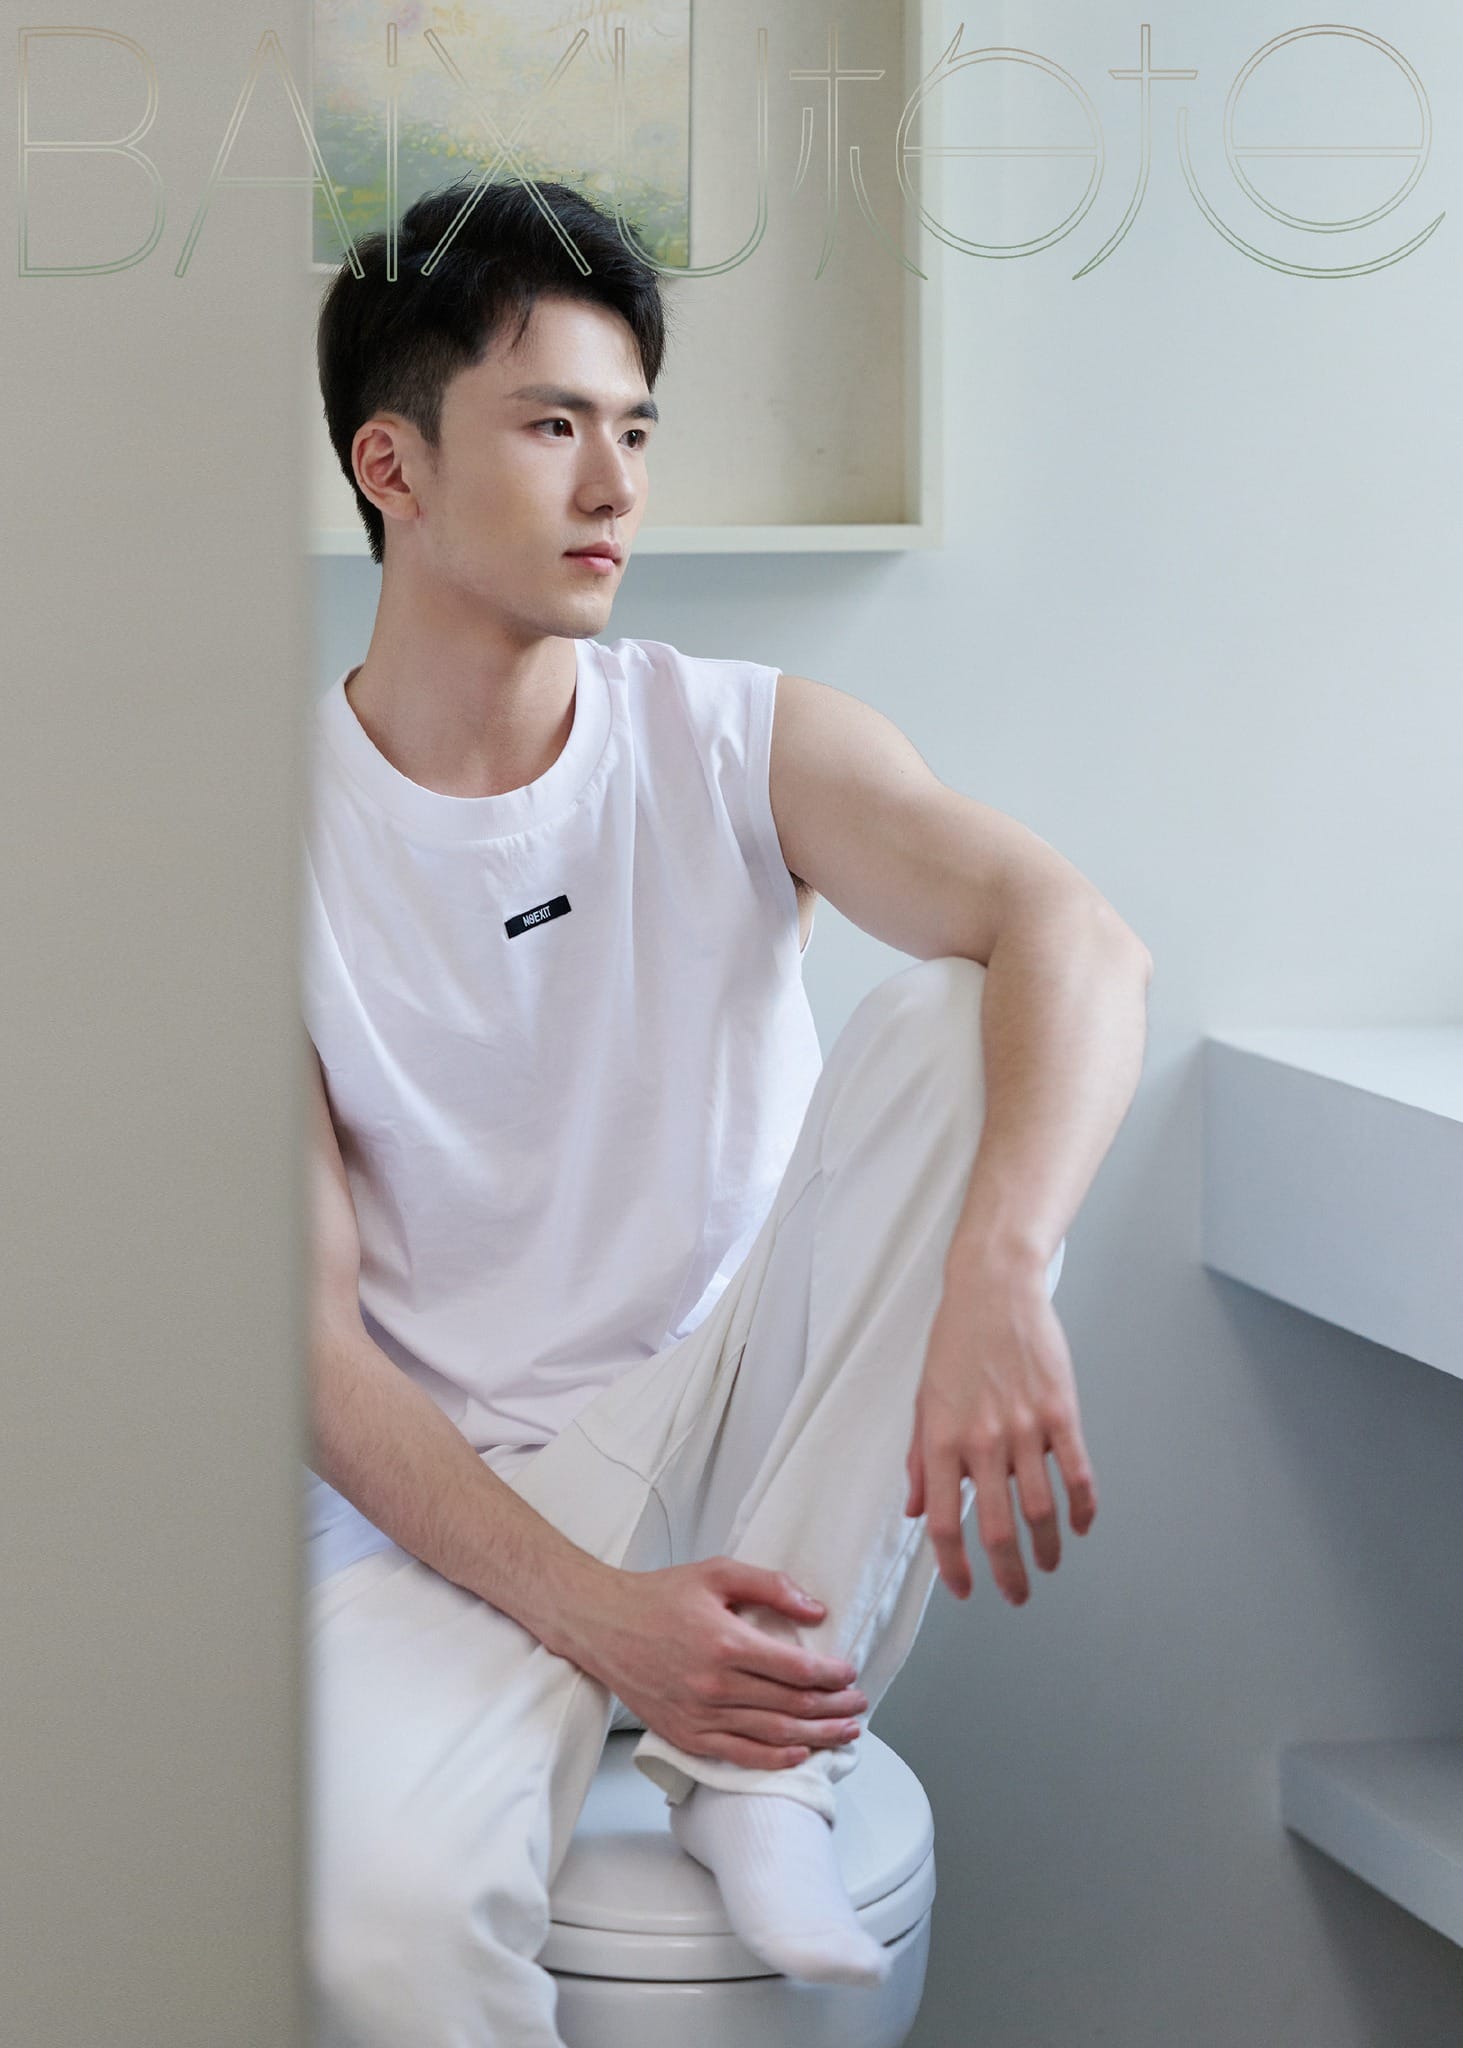 HANDSOME BOY COLLECTION P1 ‖ 18+【PHOTO】